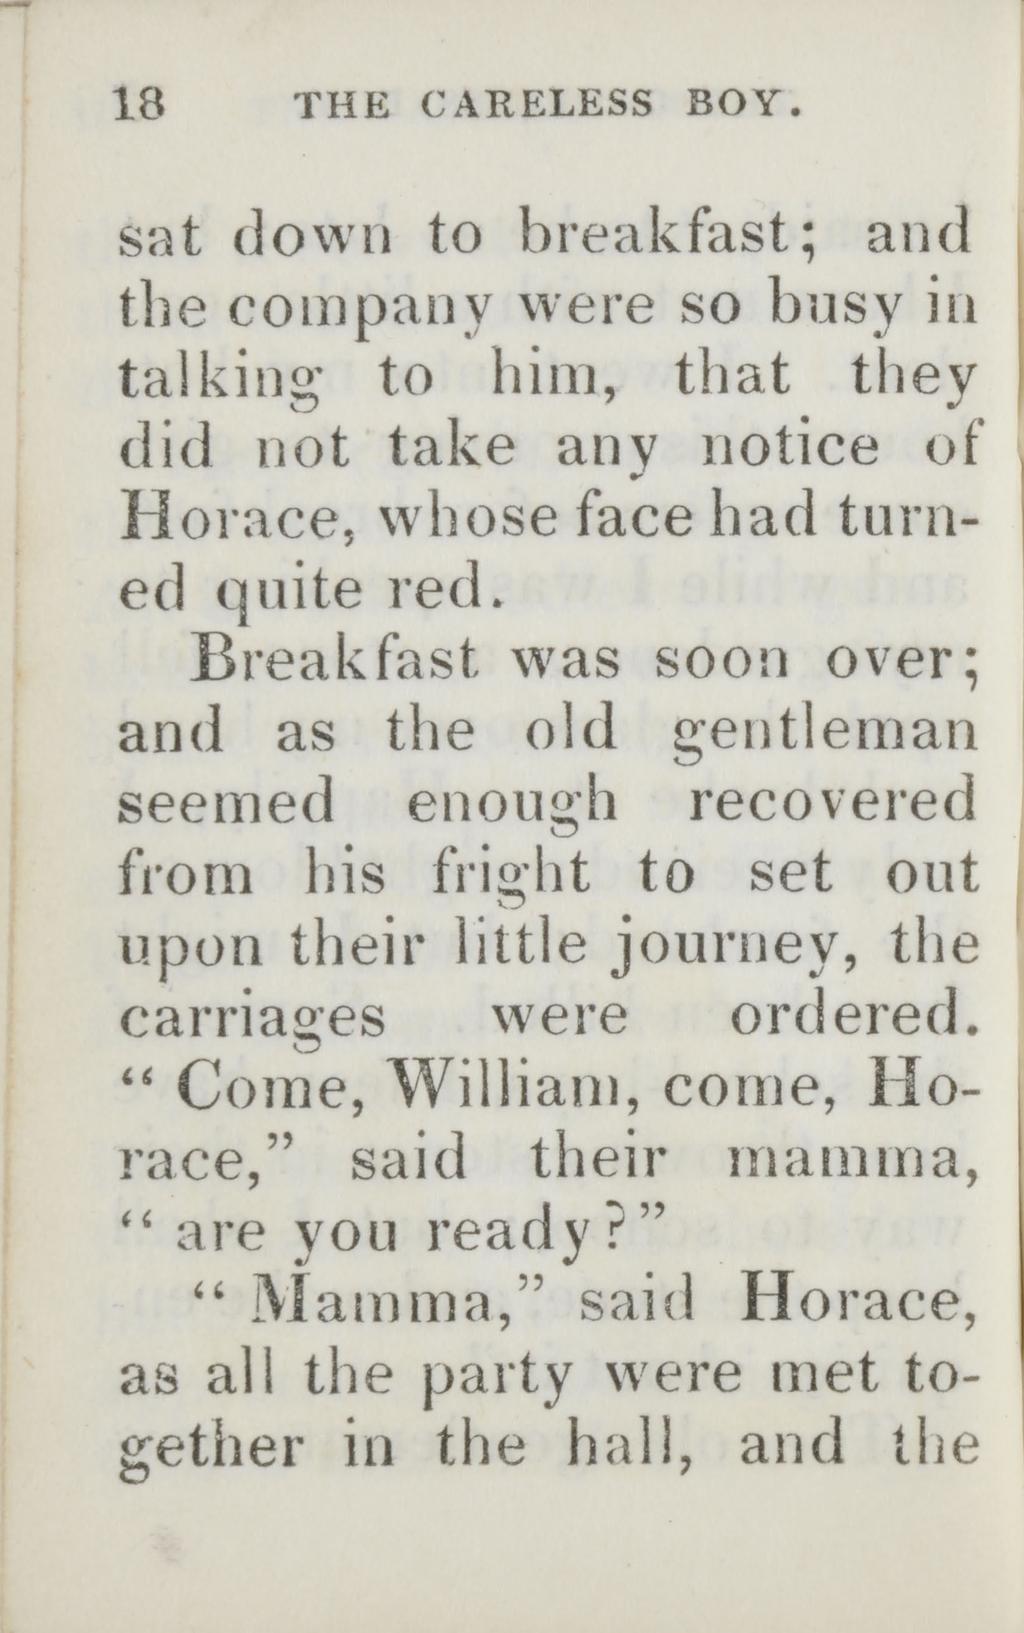 18 THE CARELESS BOY. sat down to breakfast; and the company were so busy in talking to him, that they did not take any notice of Horace, whose face had turned quite red.